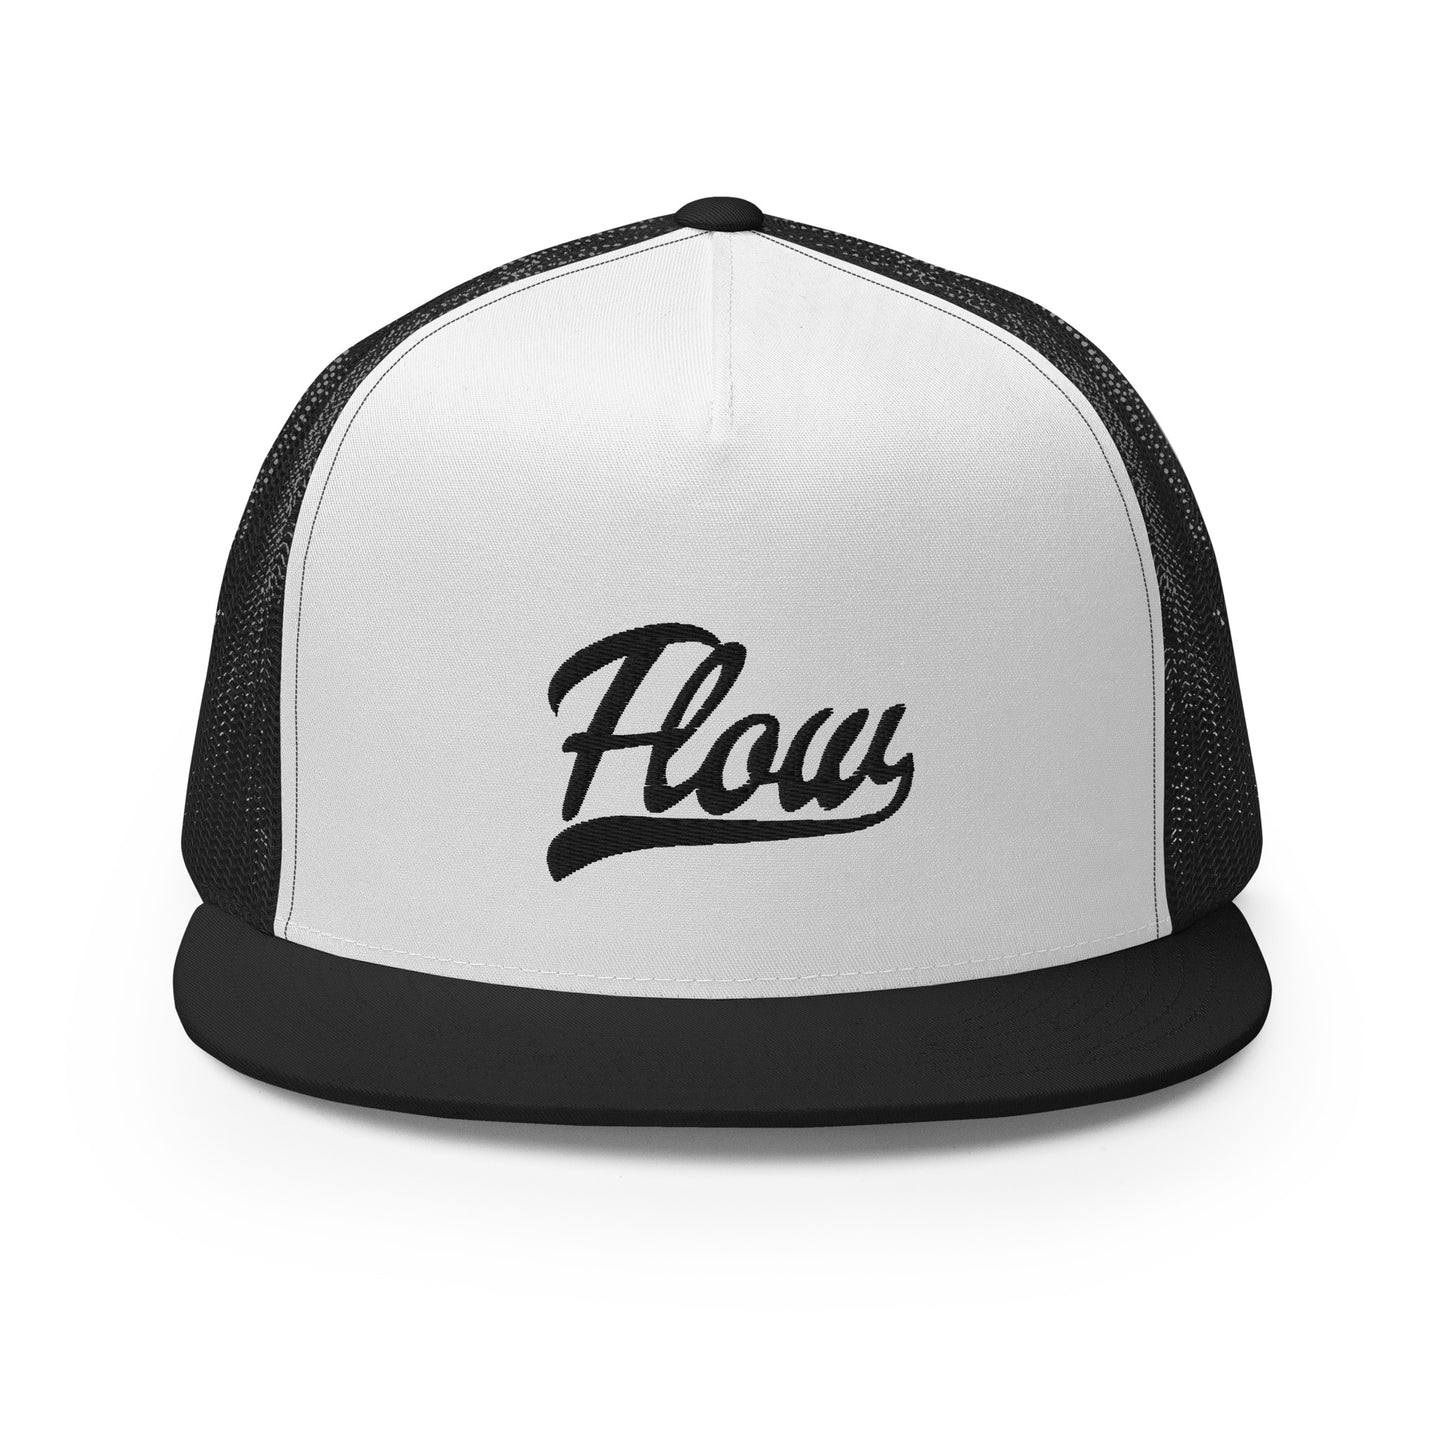 5-panel trucker hat, 4 back panels are black, front panel is white with the word 'Flow' embroidered on it.